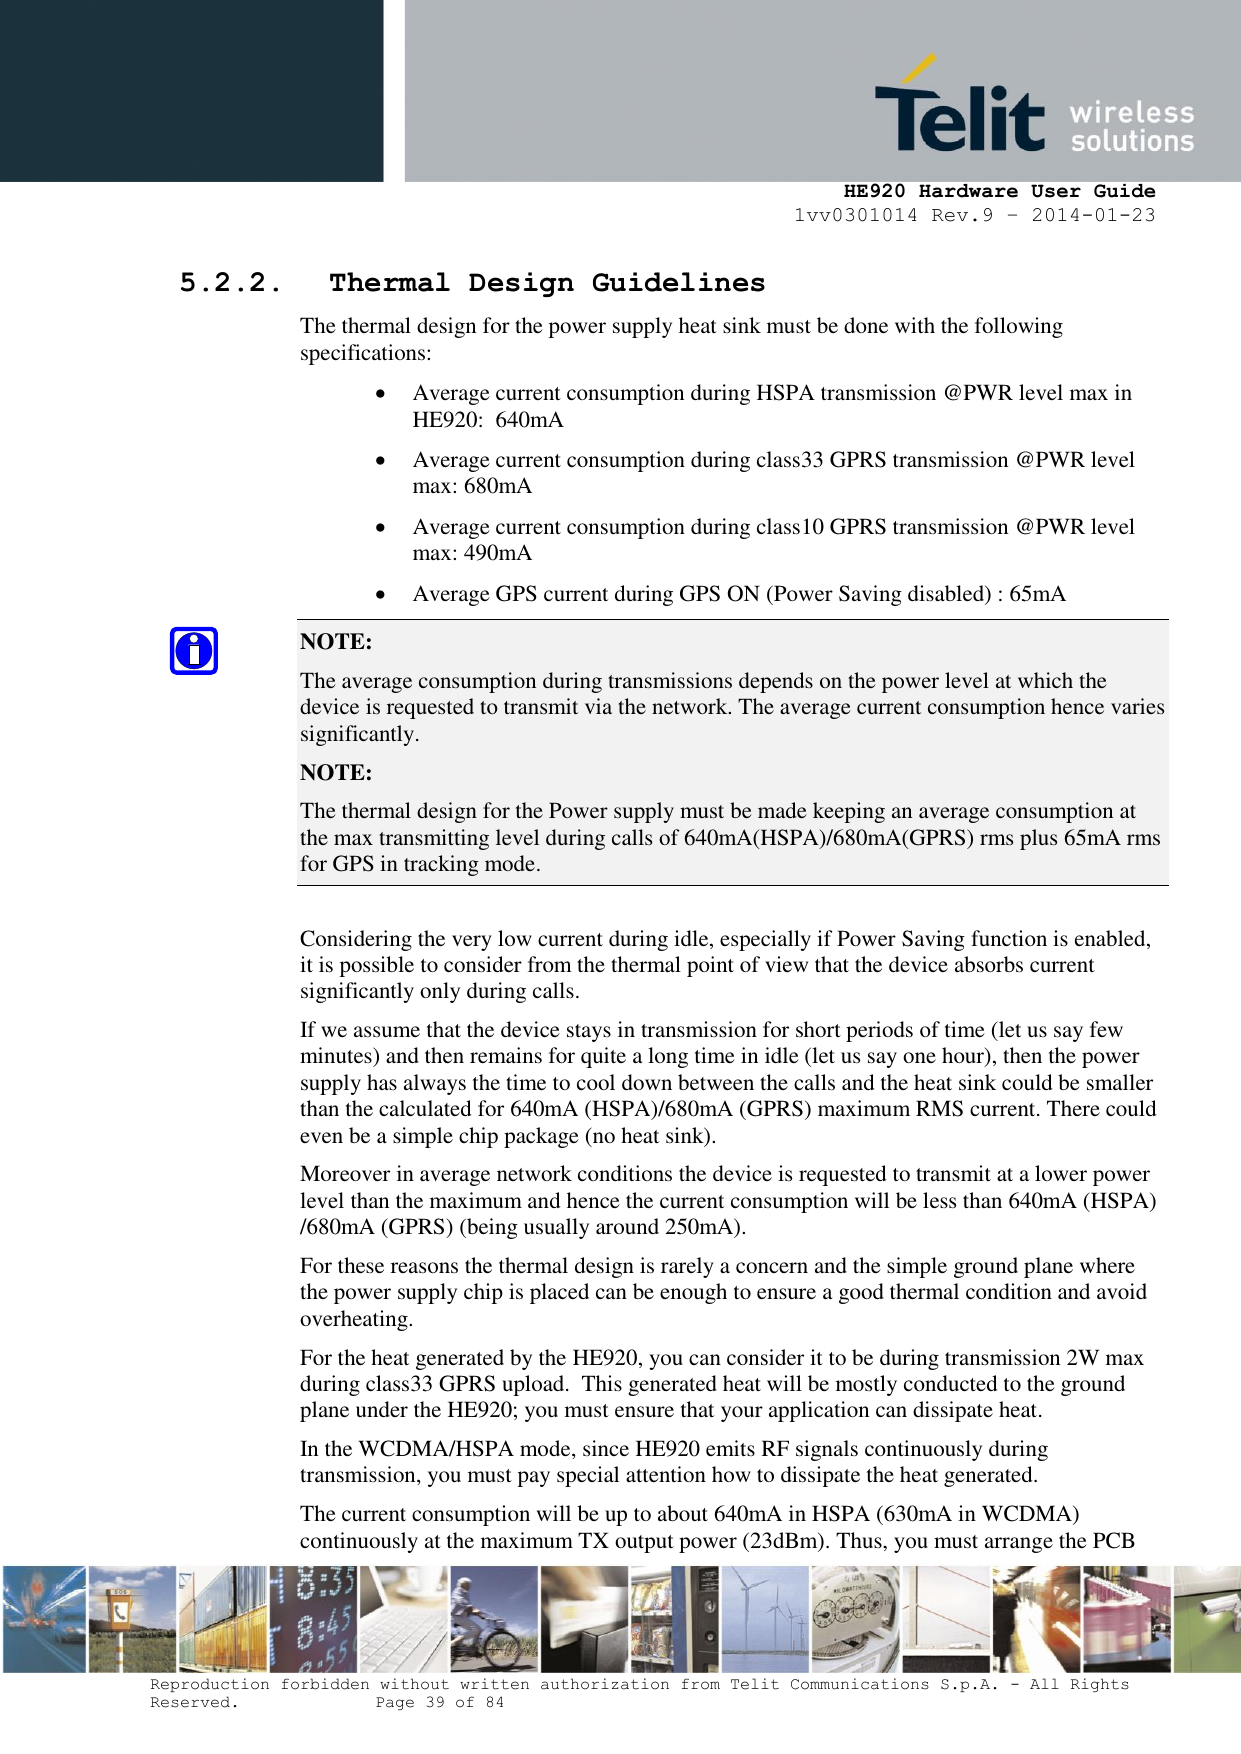     HE920 Hardware User Guide 1vv0301014 Rev.9 – 2014-01-23 Reproduction forbidden without written authorization from Telit Communications S.p.A. - All Rights Reserved.    Page 39 of 84  5.2.2. Thermal Design Guidelines The thermal design for the power supply heat sink must be done with the following specifications:  Average current consumption during HSPA transmission @PWR level max in HE920:  640mA  Average current consumption during class33 GPRS transmission @PWR level max: 680mA   Average current consumption during class10 GPRS transmission @PWR level max: 490mA   Average GPS current during GPS ON (Power Saving disabled) : 65mA NOTE:  The average consumption during transmissions depends on the power level at which the device is requested to transmit via the network. The average current consumption hence varies significantly. NOTE:  The thermal design for the Power supply must be made keeping an average consumption at the max transmitting level during calls of 640mA(HSPA)/680mA(GPRS) rms plus 65mA rms for GPS in tracking mode.  Considering the very low current during idle, especially if Power Saving function is enabled, it is possible to consider from the thermal point of view that the device absorbs current significantly only during calls.  If we assume that the device stays in transmission for short periods of time (let us say few minutes) and then remains for quite a long time in idle (let us say one hour), then the power supply has always the time to cool down between the calls and the heat sink could be smaller than the calculated for 640mA (HSPA)/680mA (GPRS) maximum RMS current. There could even be a simple chip package (no heat sink). Moreover in average network conditions the device is requested to transmit at a lower power level than the maximum and hence the current consumption will be less than 640mA (HSPA) /680mA (GPRS) (being usually around 250mA). For these reasons the thermal design is rarely a concern and the simple ground plane where the power supply chip is placed can be enough to ensure a good thermal condition and avoid overheating. For the heat generated by the HE920, you can consider it to be during transmission 2W max during class33 GPRS upload.  This generated heat will be mostly conducted to the ground plane under the HE920; you must ensure that your application can dissipate heat. In the WCDMA/HSPA mode, since HE920 emits RF signals continuously during transmission, you must pay special attention how to dissipate the heat generated. The current consumption will be up to about 640mA in HSPA (630mA in WCDMA) continuously at the maximum TX output power (23dBm). Thus, you must arrange the PCB 